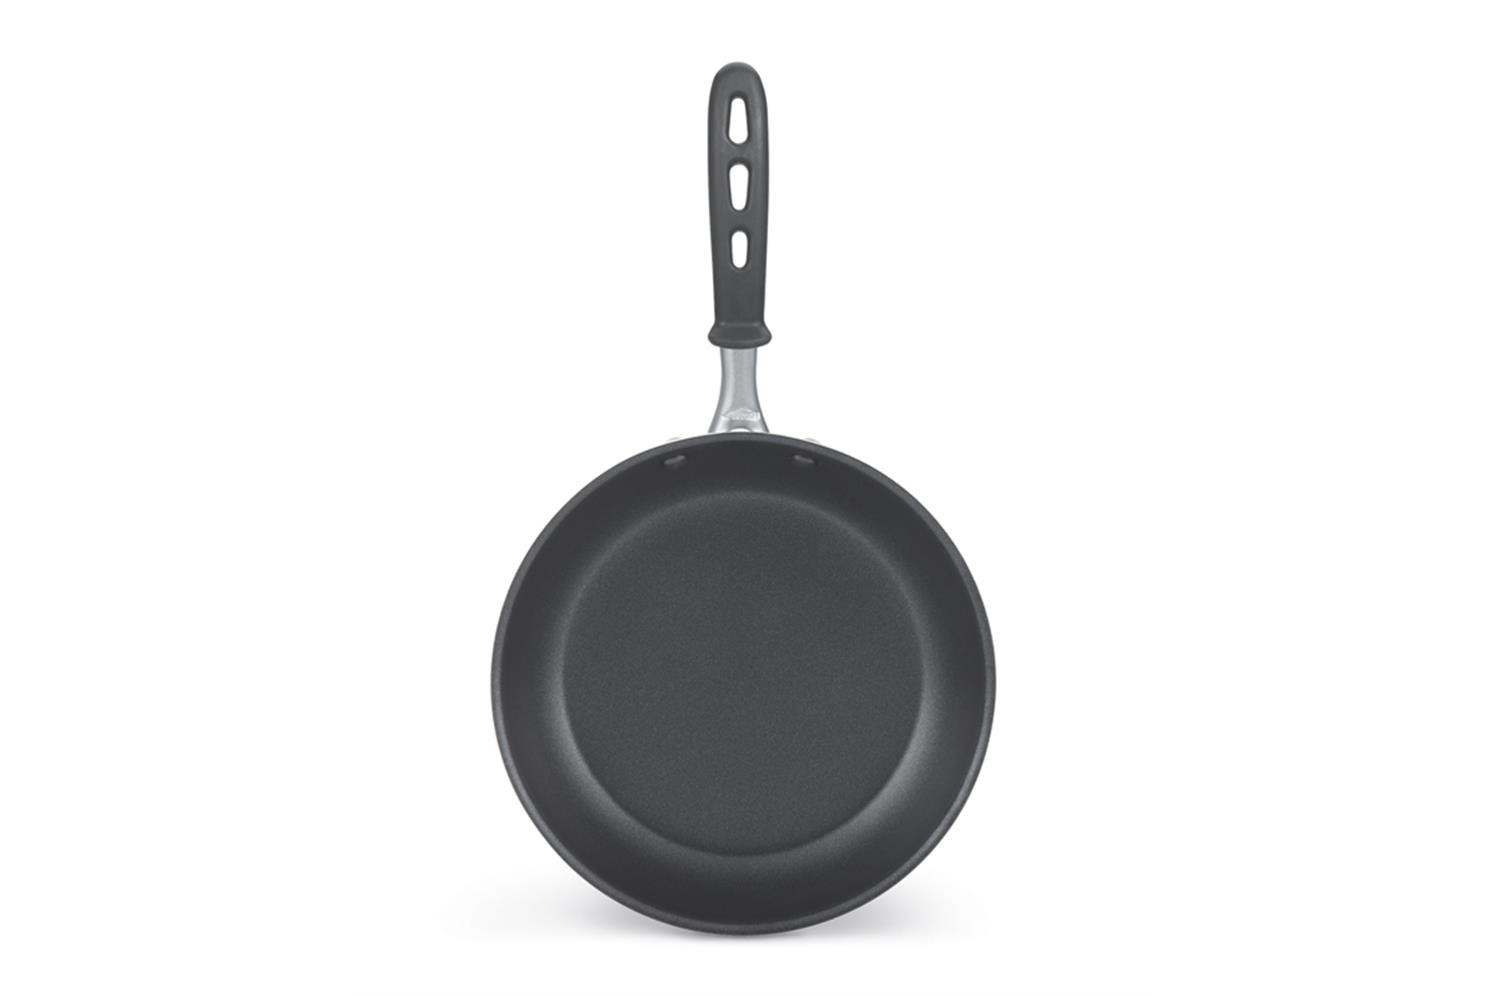 Vollrath 67928 Wear-Ever Fry Pans with CeramiGuard II Interior with TriVent Handle